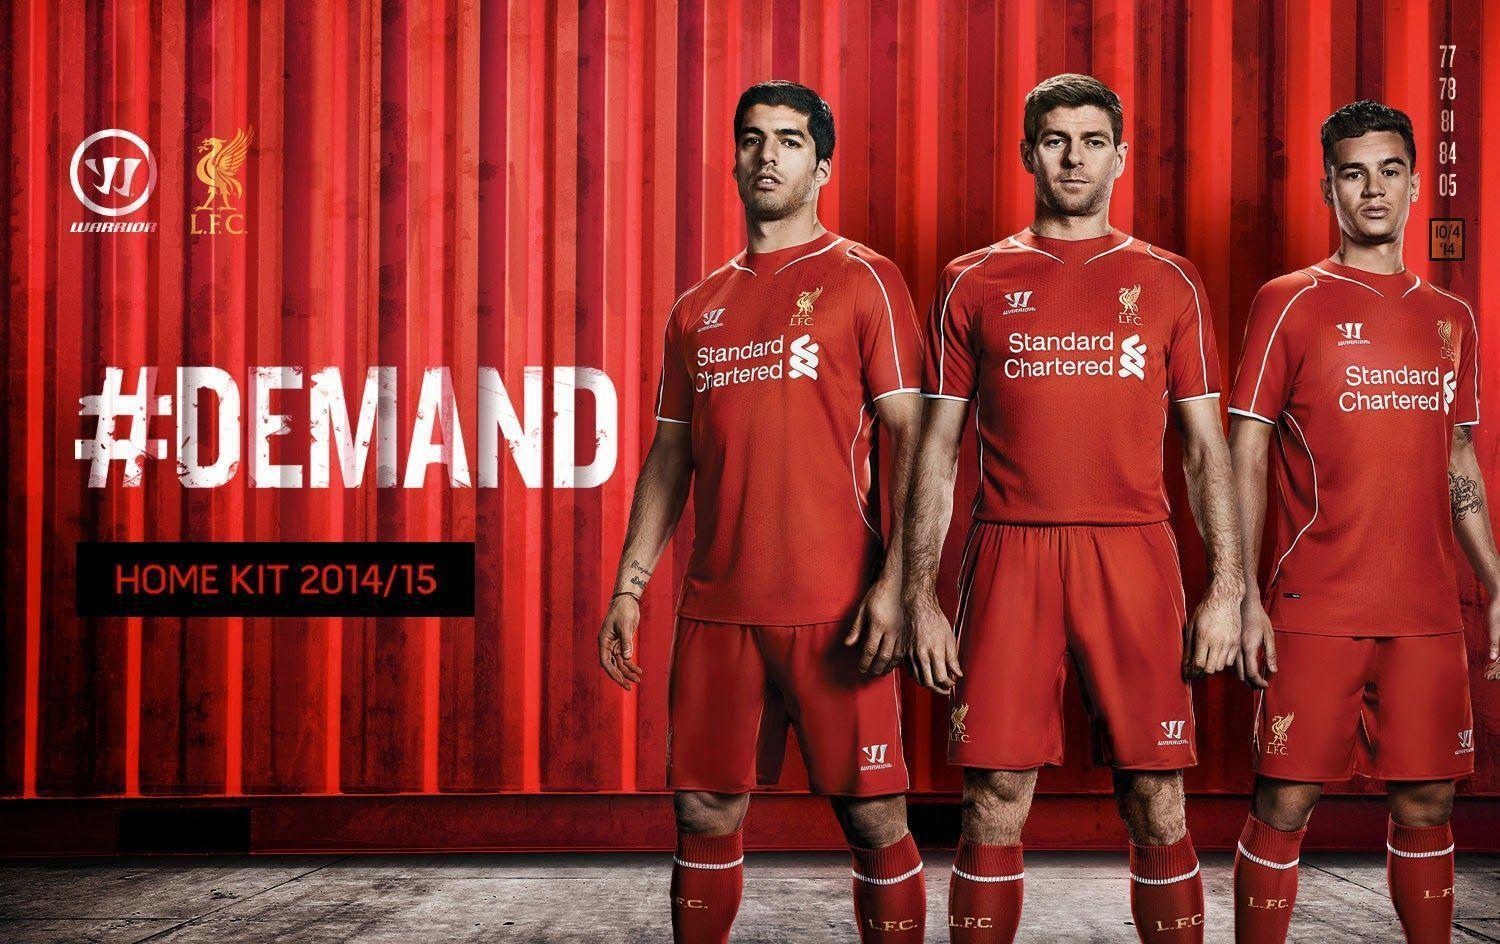 Liverpool Jersey 2014 2015 Warrior Home Kit Wallpaper Wide Or HD